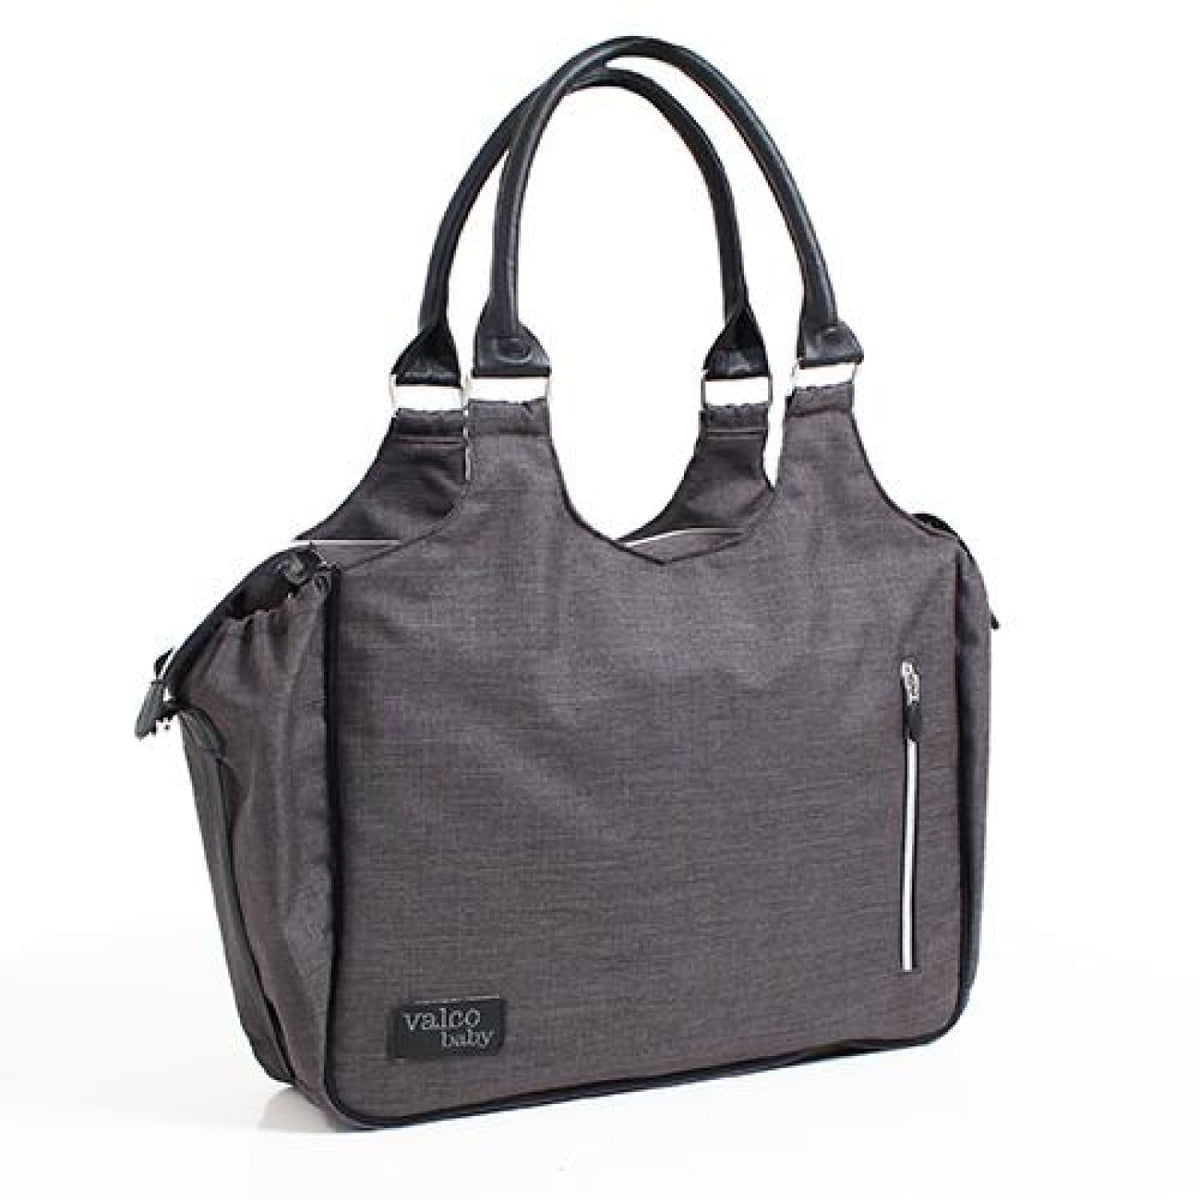 Valco Baby Mothers Bag - Charcoal - ON THE GO - NAPPY BAGS/LUGGAGE